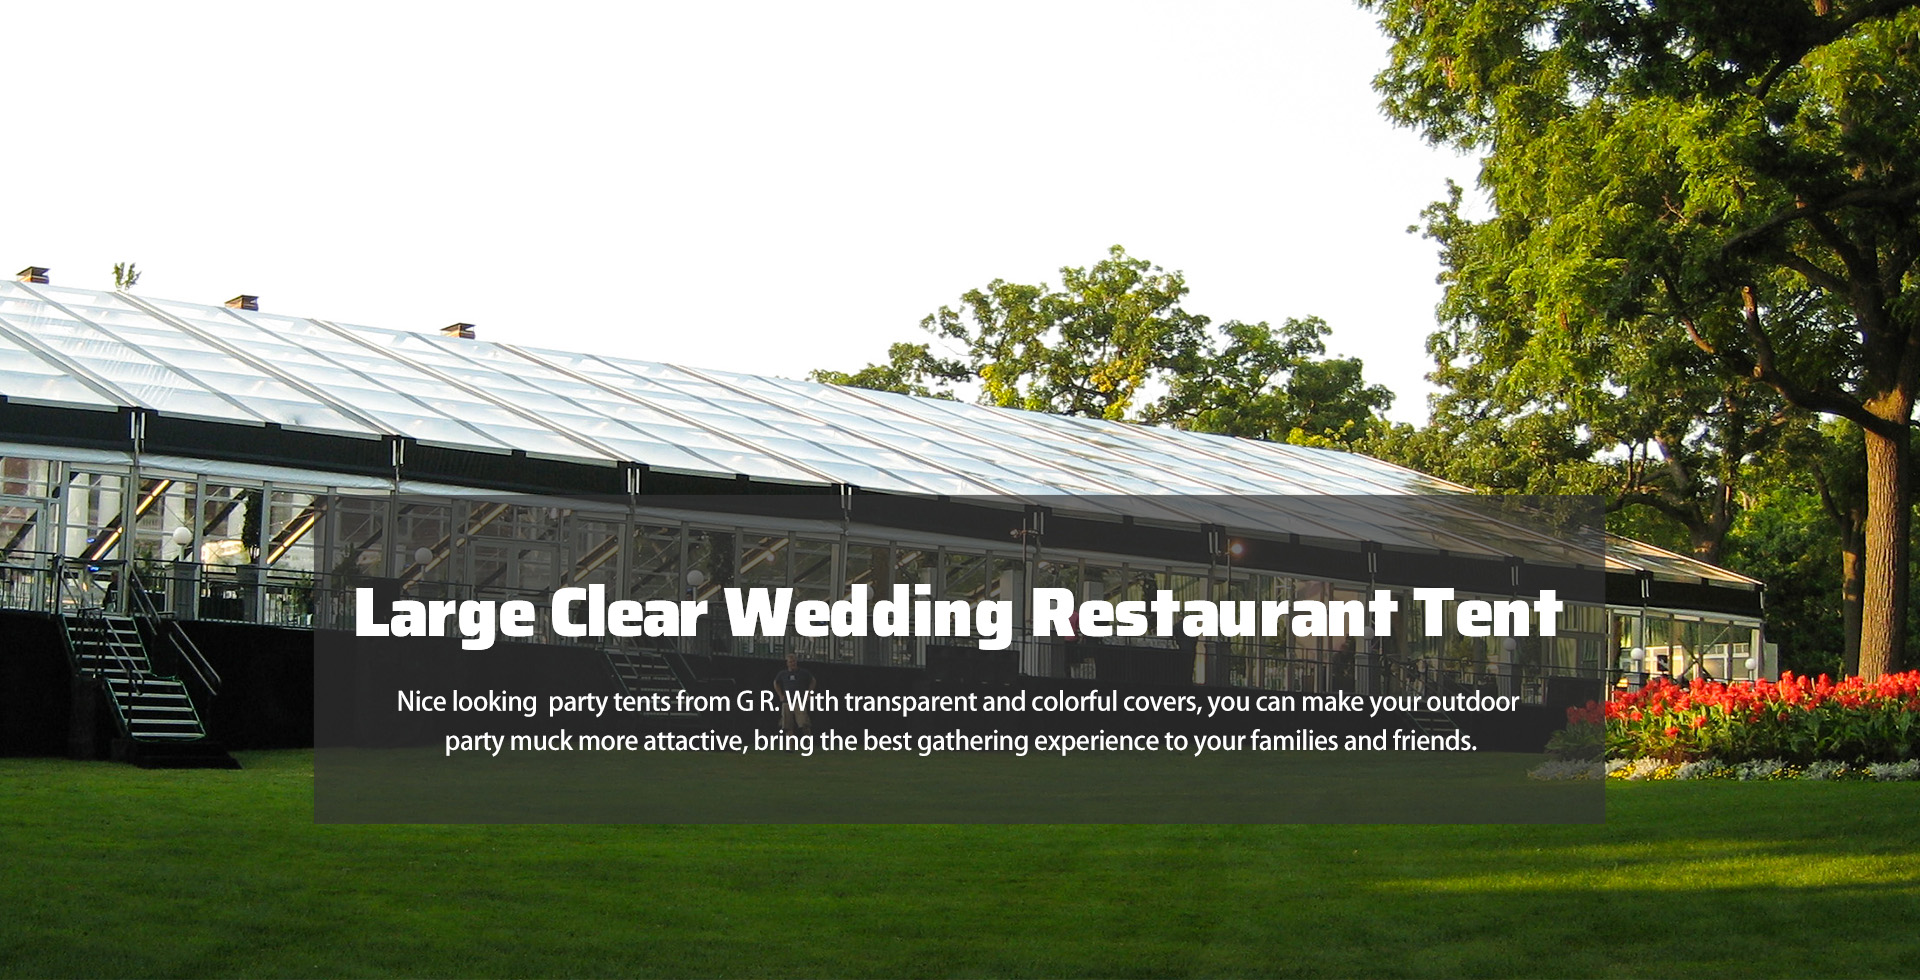 Large Clear Wedding Restaurant Tent